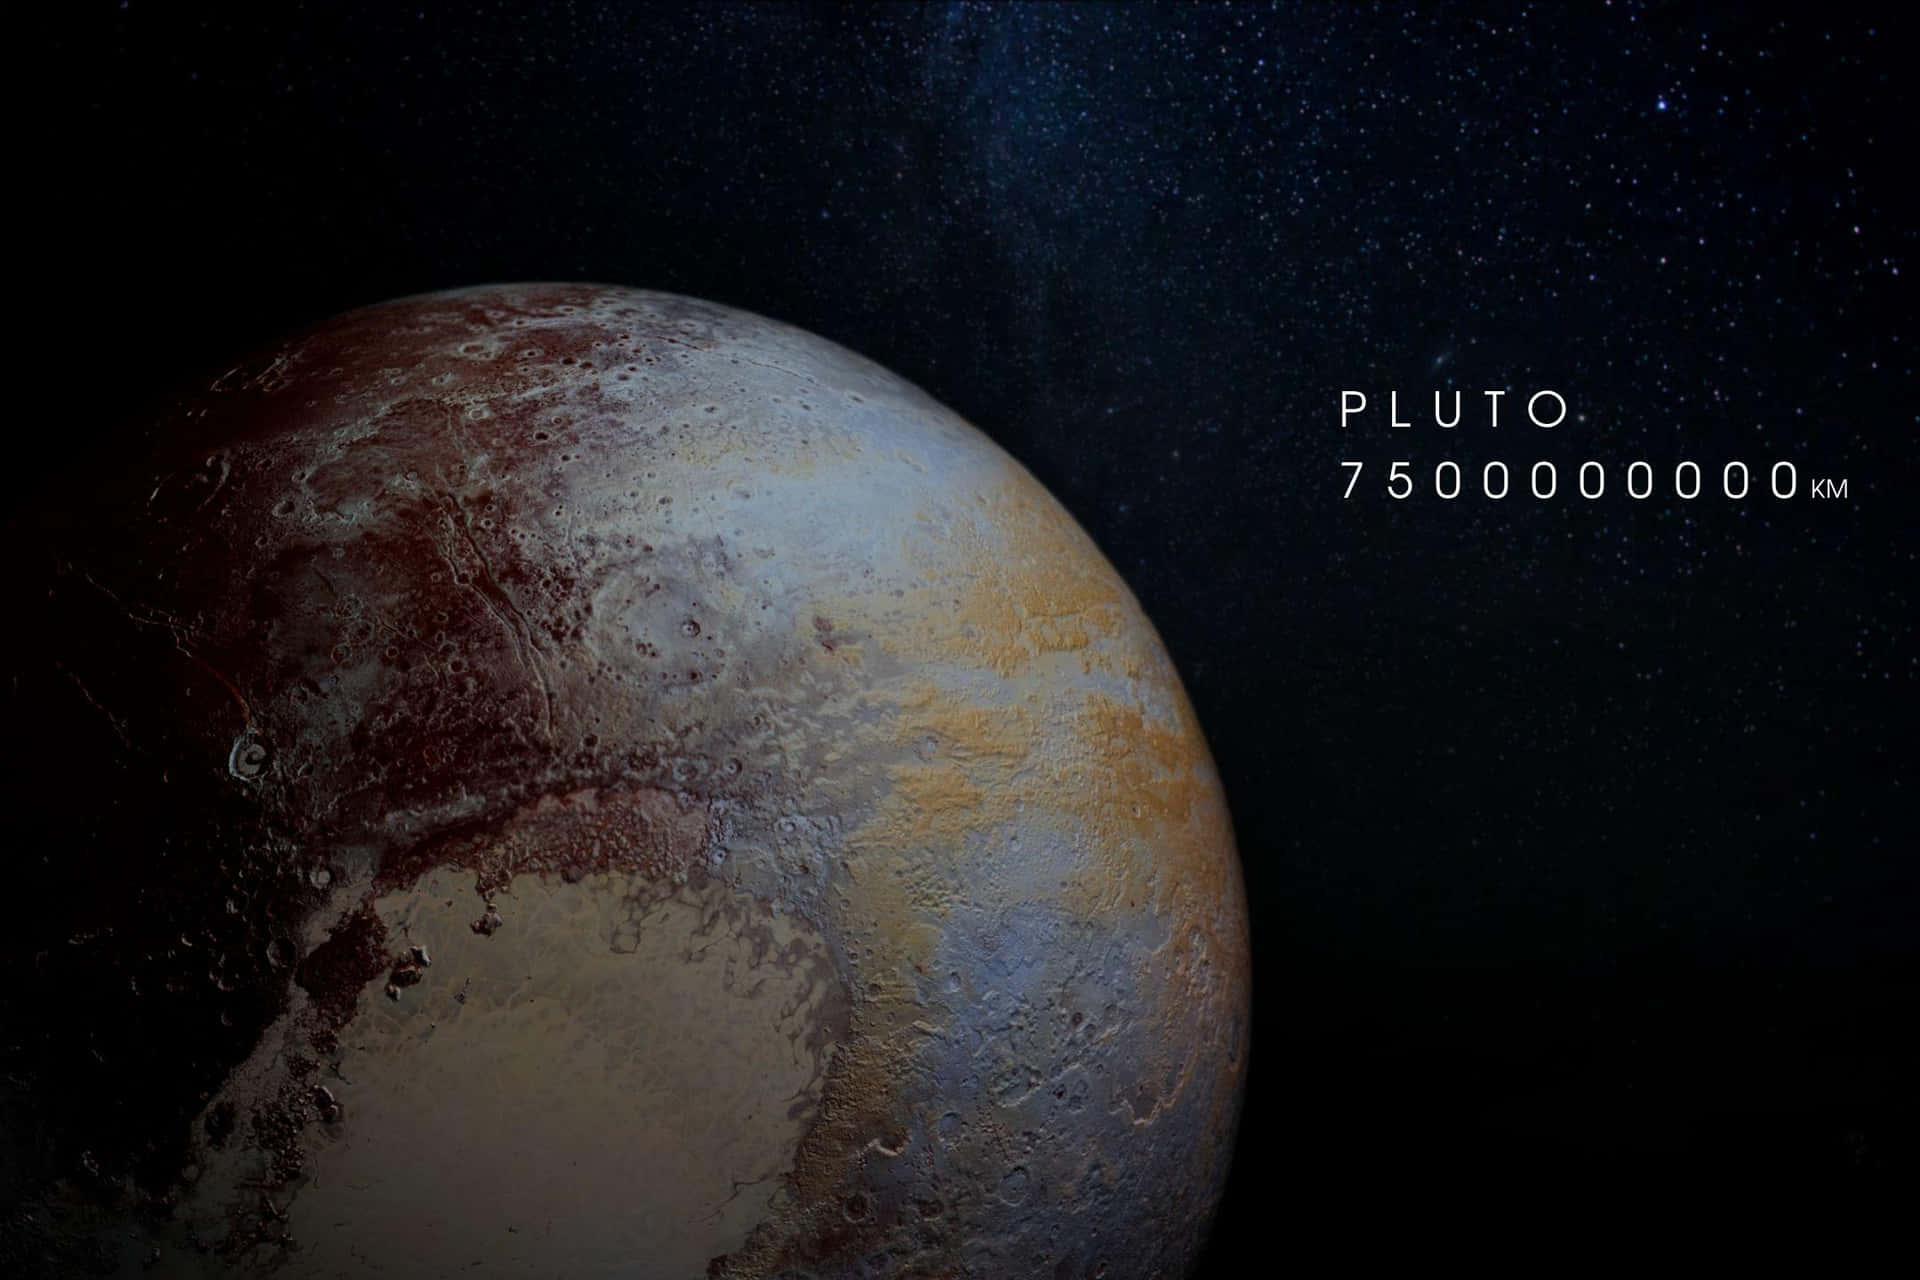 The Dwarf Planet Pluto, Plutoid and Formerly Non-Planet